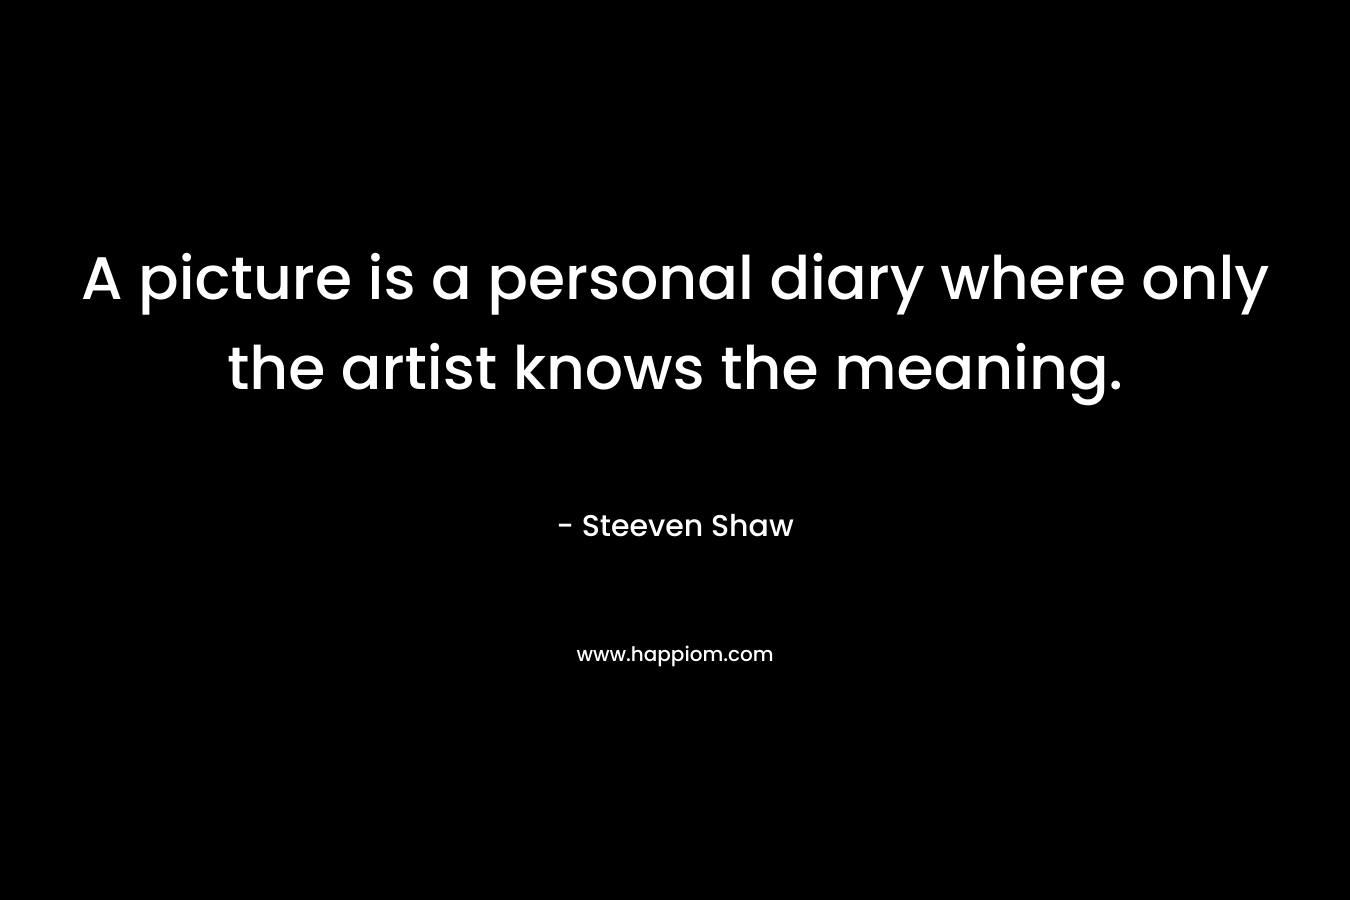 A picture is a personal diary where only the artist knows the meaning. – Steeven Shaw